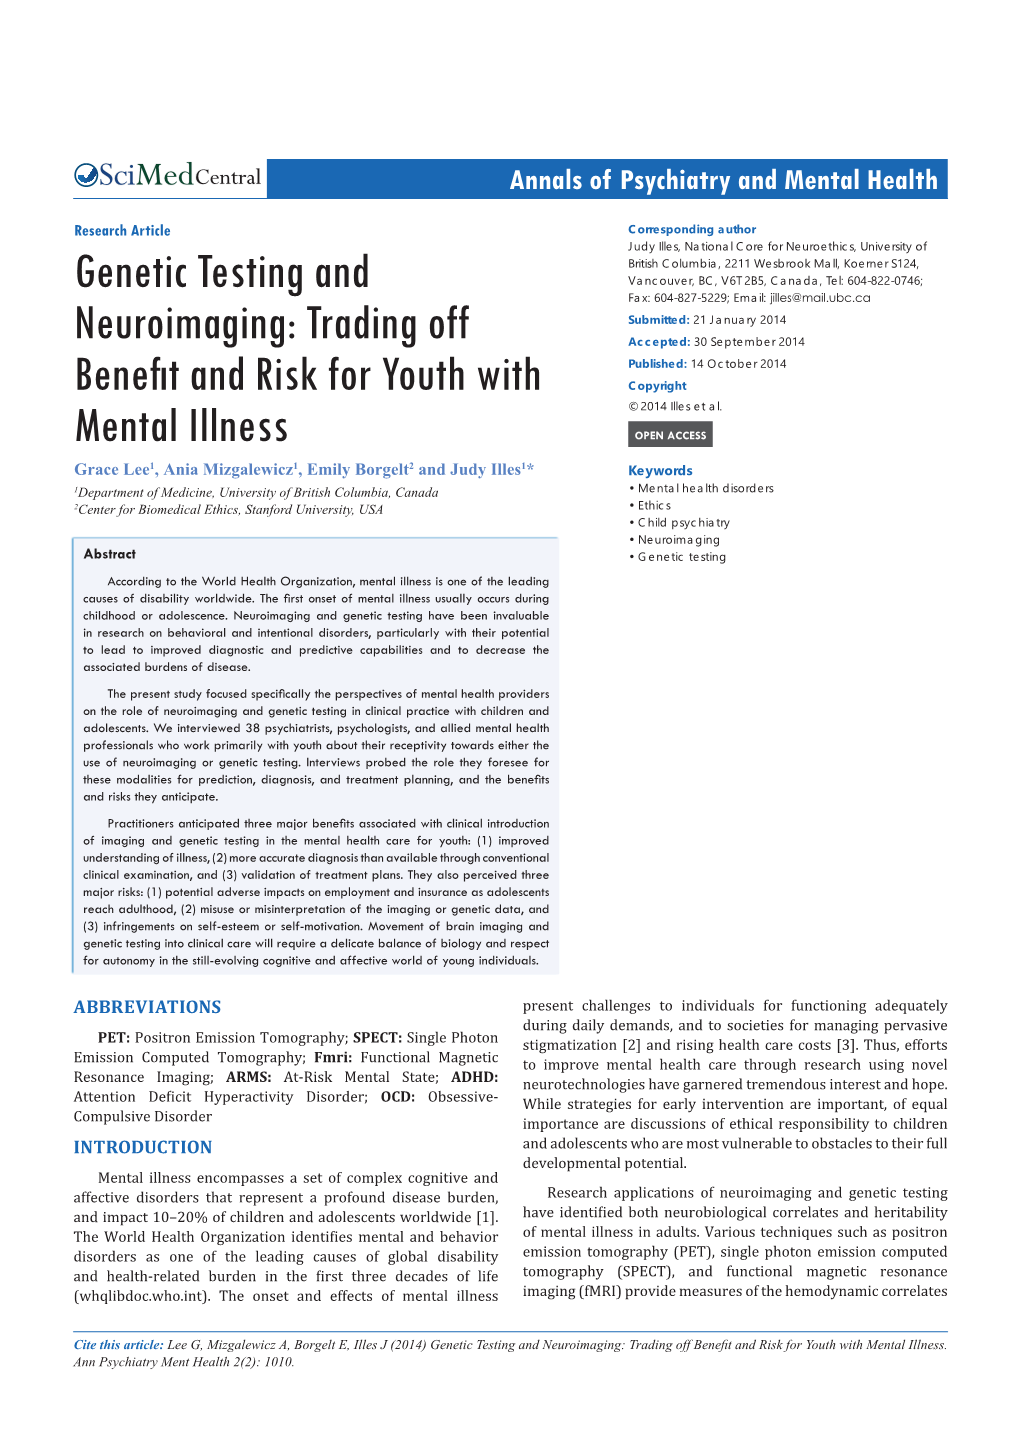 Genetic Testing and Neuroimaging: Trading Off Benefit and Risk for Youth with Mental Illness